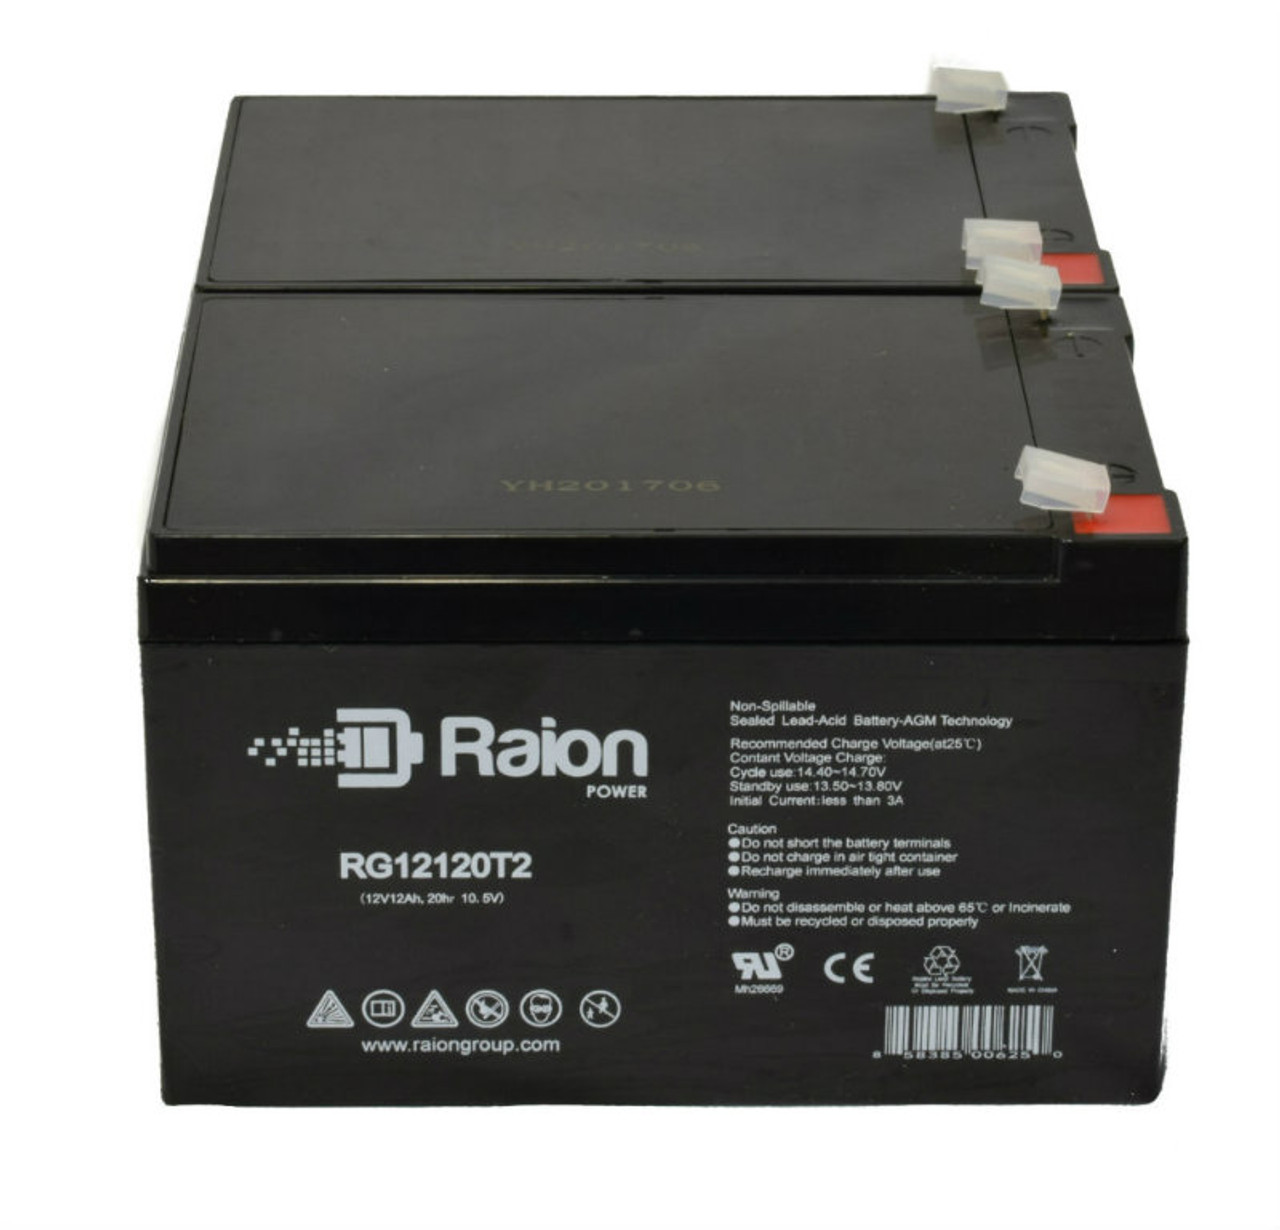 Raion Power RG12120T2 Replacement Battery Set for Pride Mobility Go-Go Elite Traveller SC40E Mobility Scooter - 2 Pack